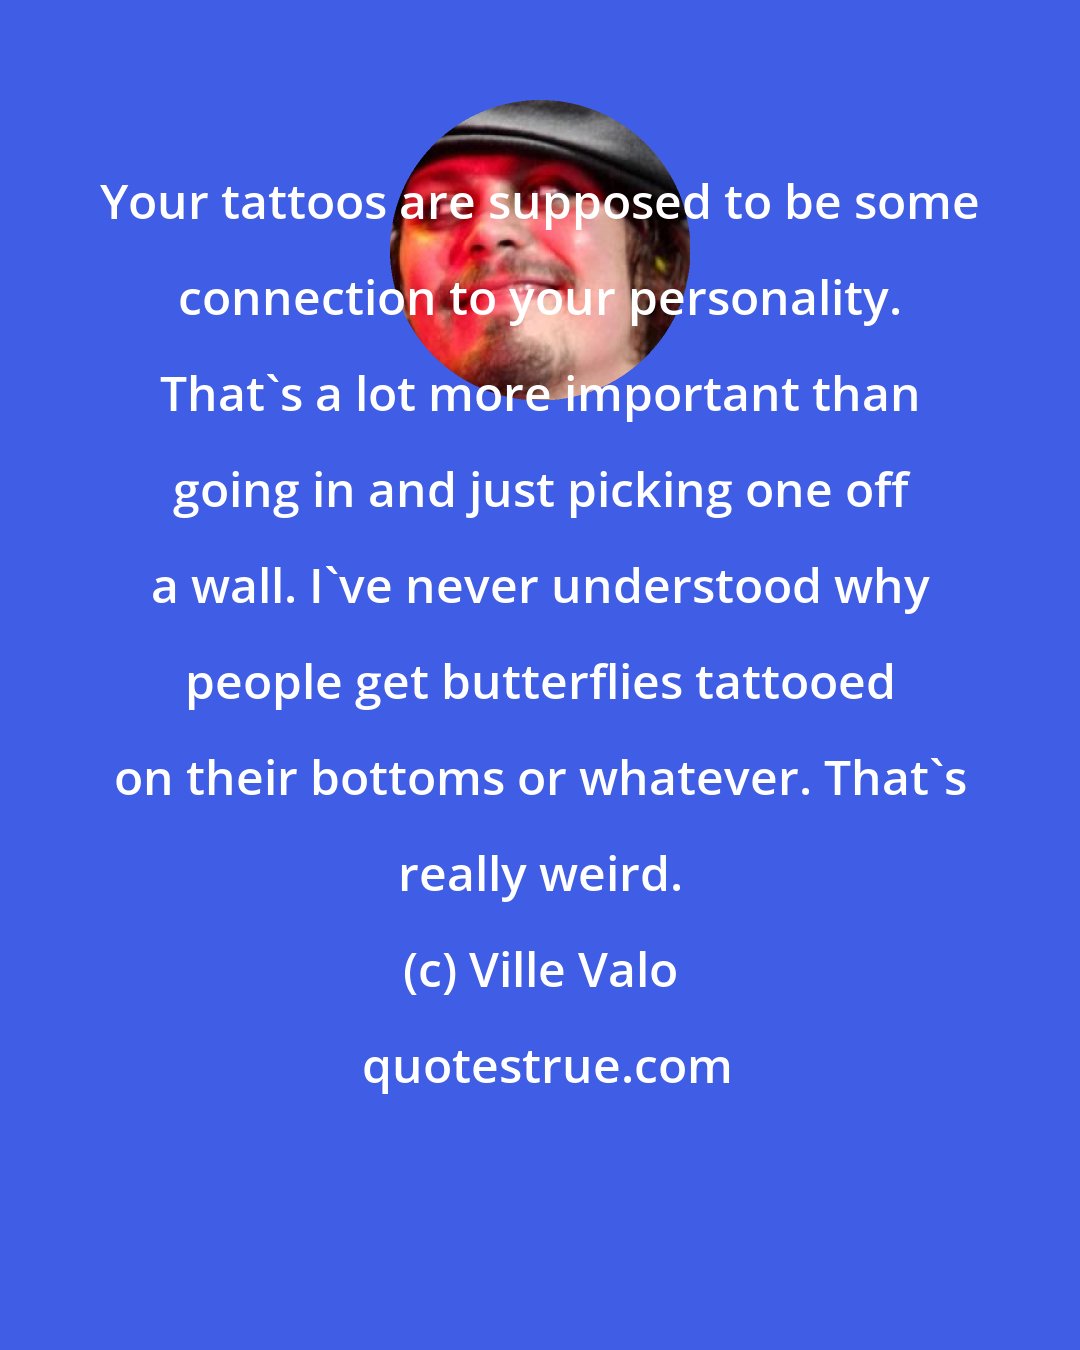 Ville Valo: Your tattoos are supposed to be some connection to your personality. That's a lot more important than going in and just picking one off a wall. I've never understood why people get butterflies tattooed on their bottoms or whatever. That's really weird.